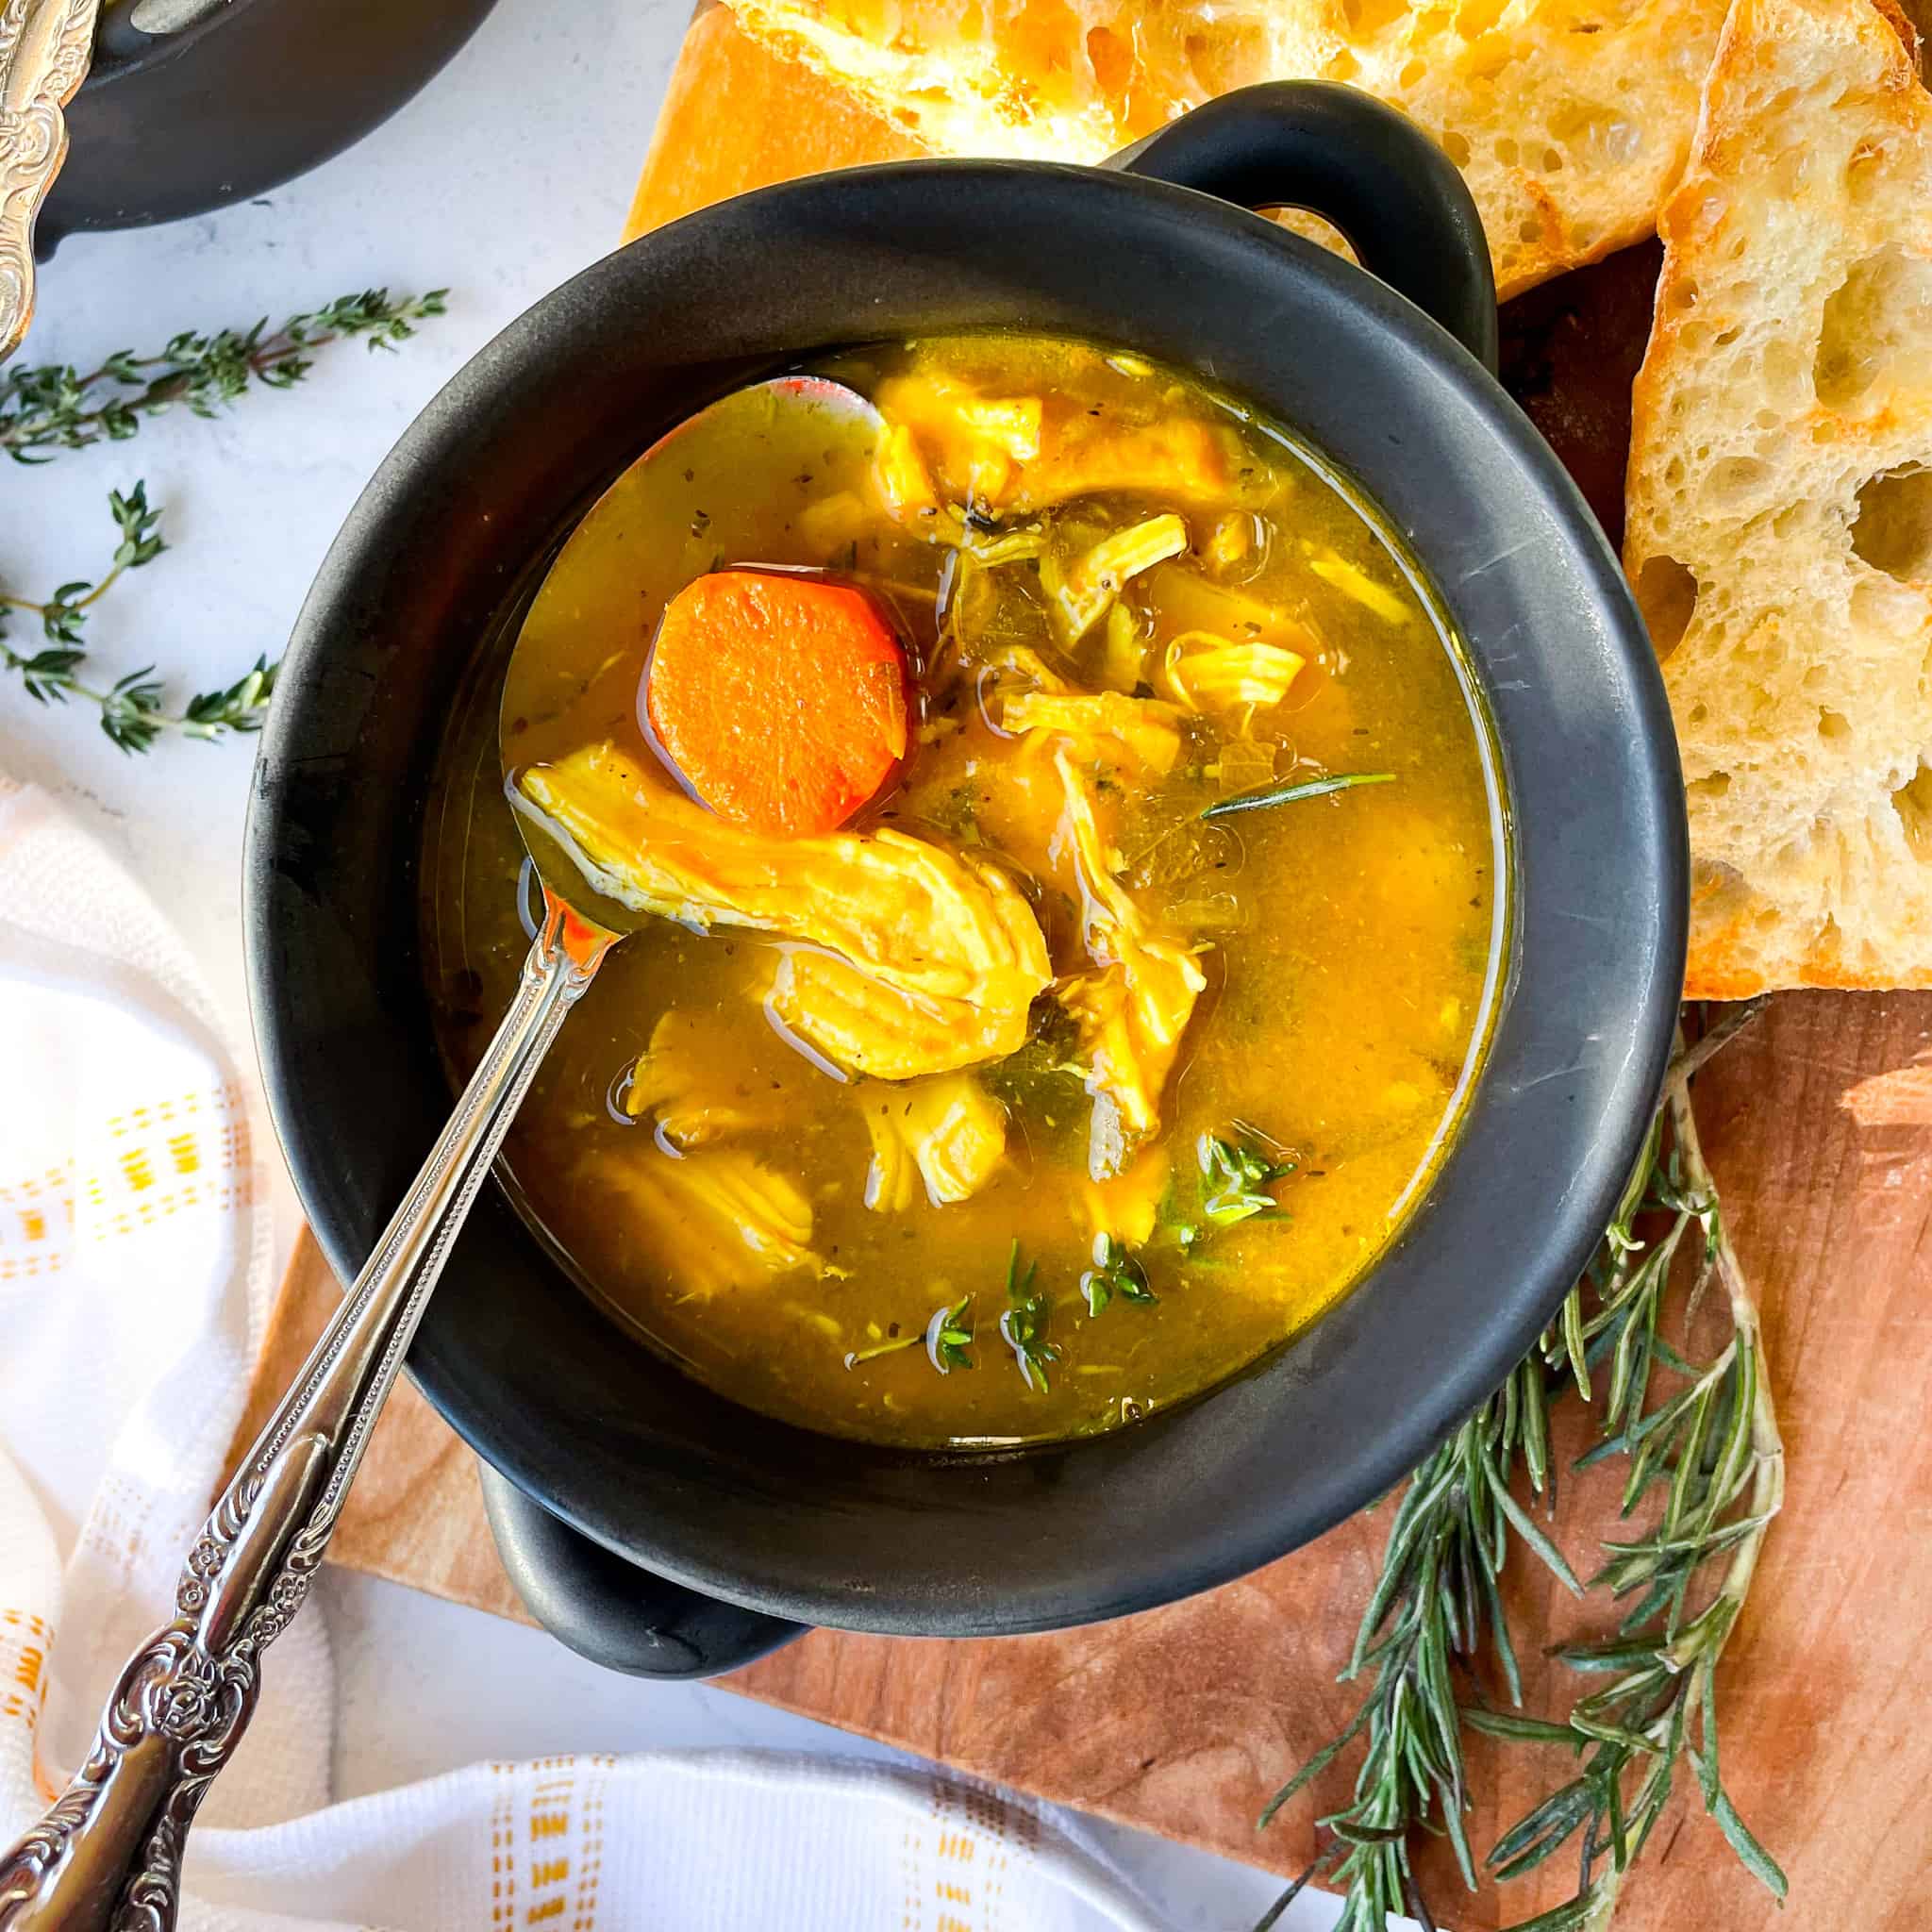 The 6 Best Soup Makers of 2023